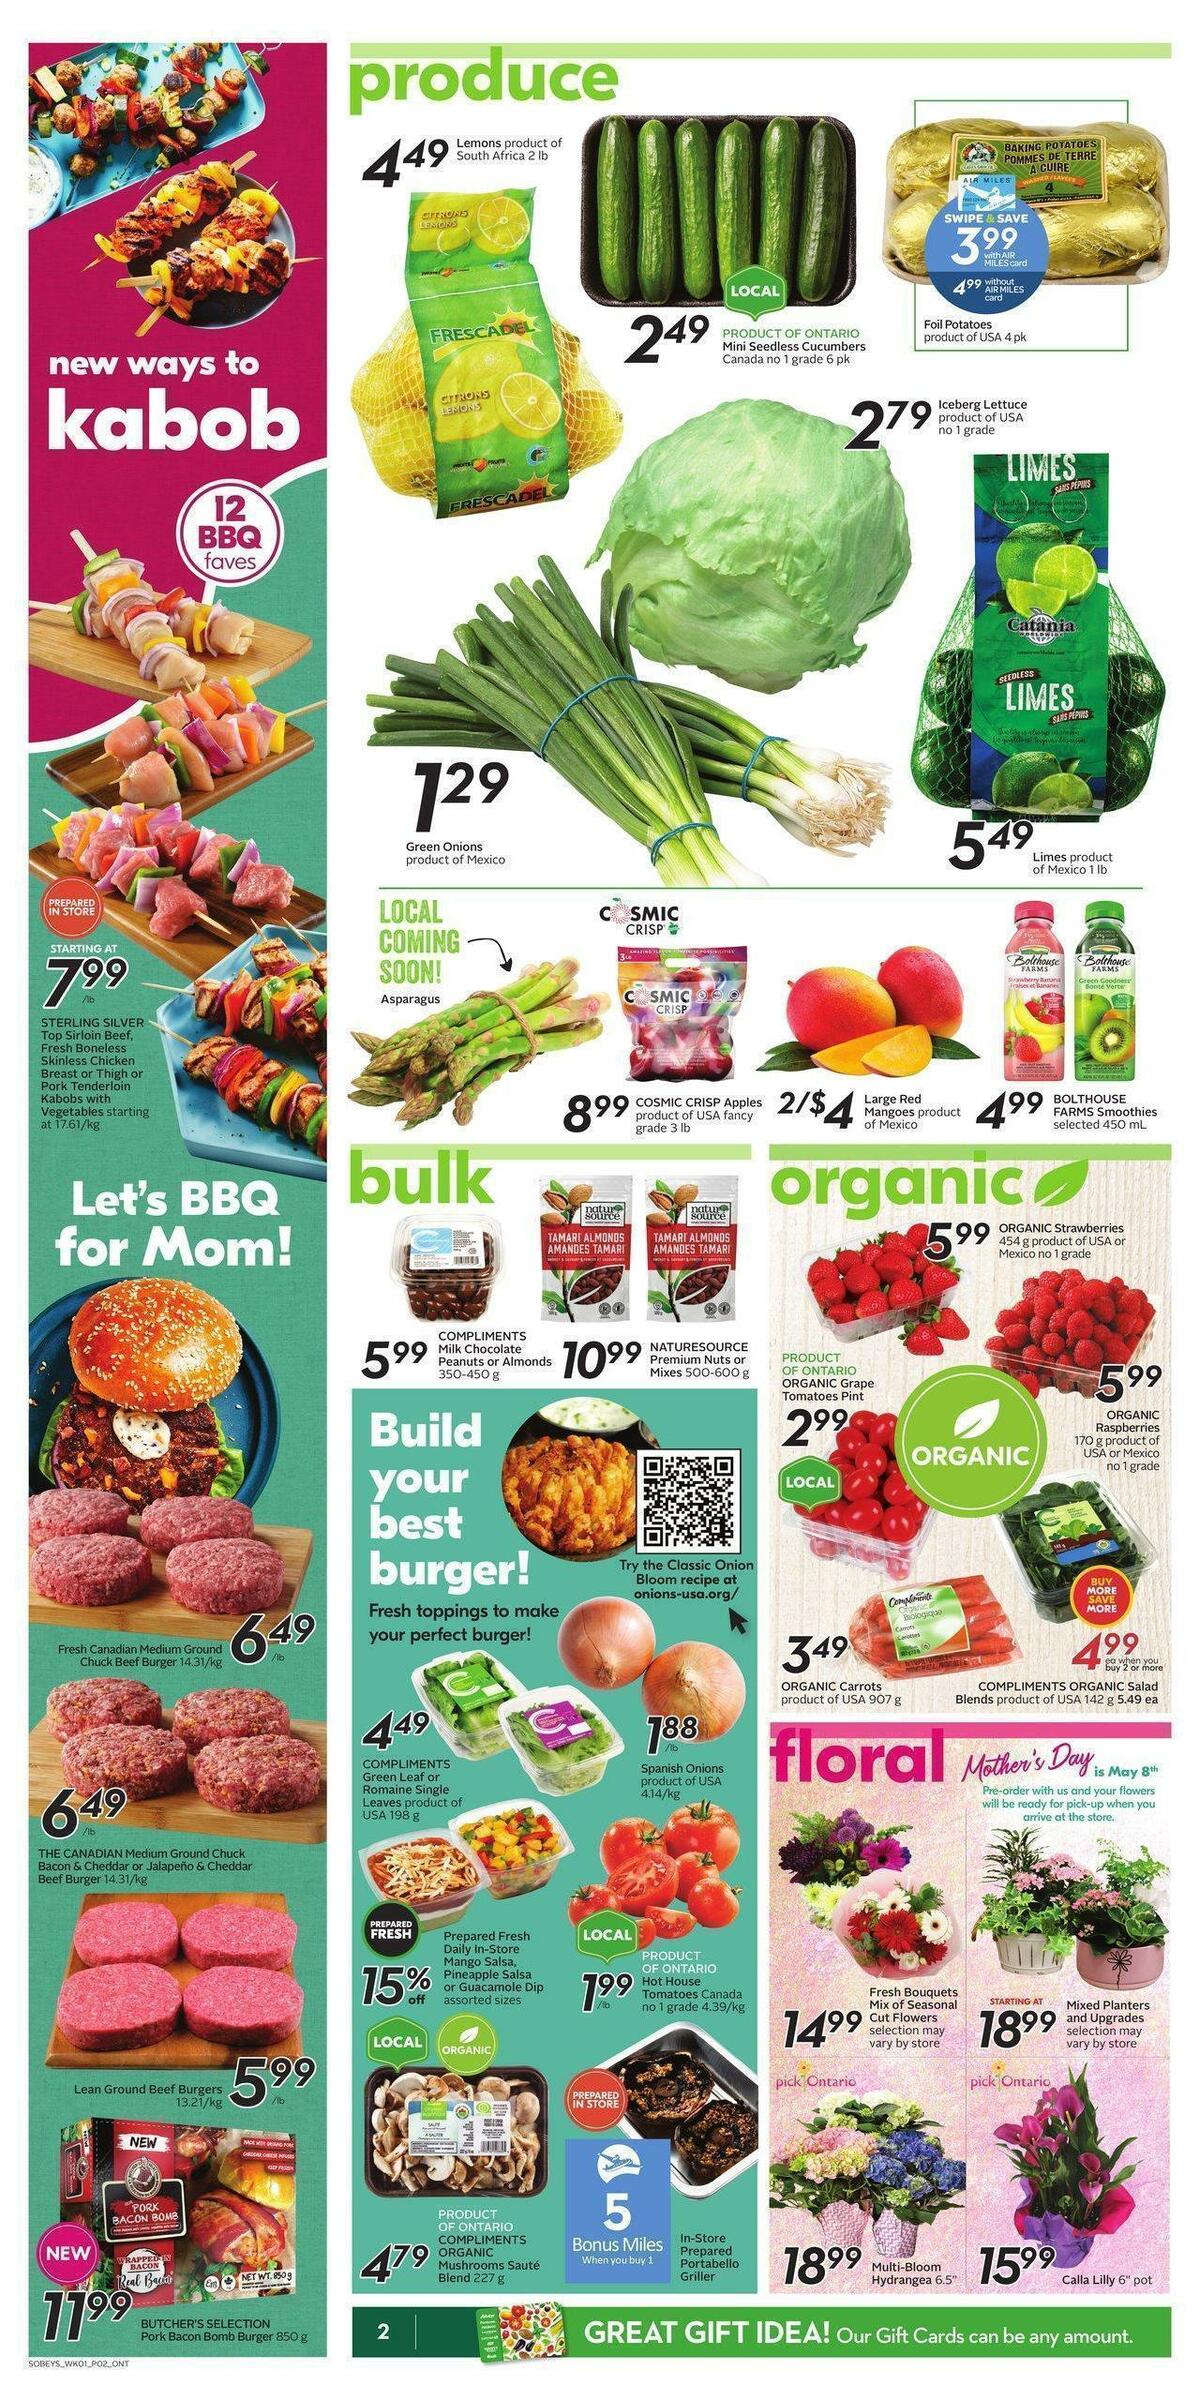 Sobeys Flyer from May 5